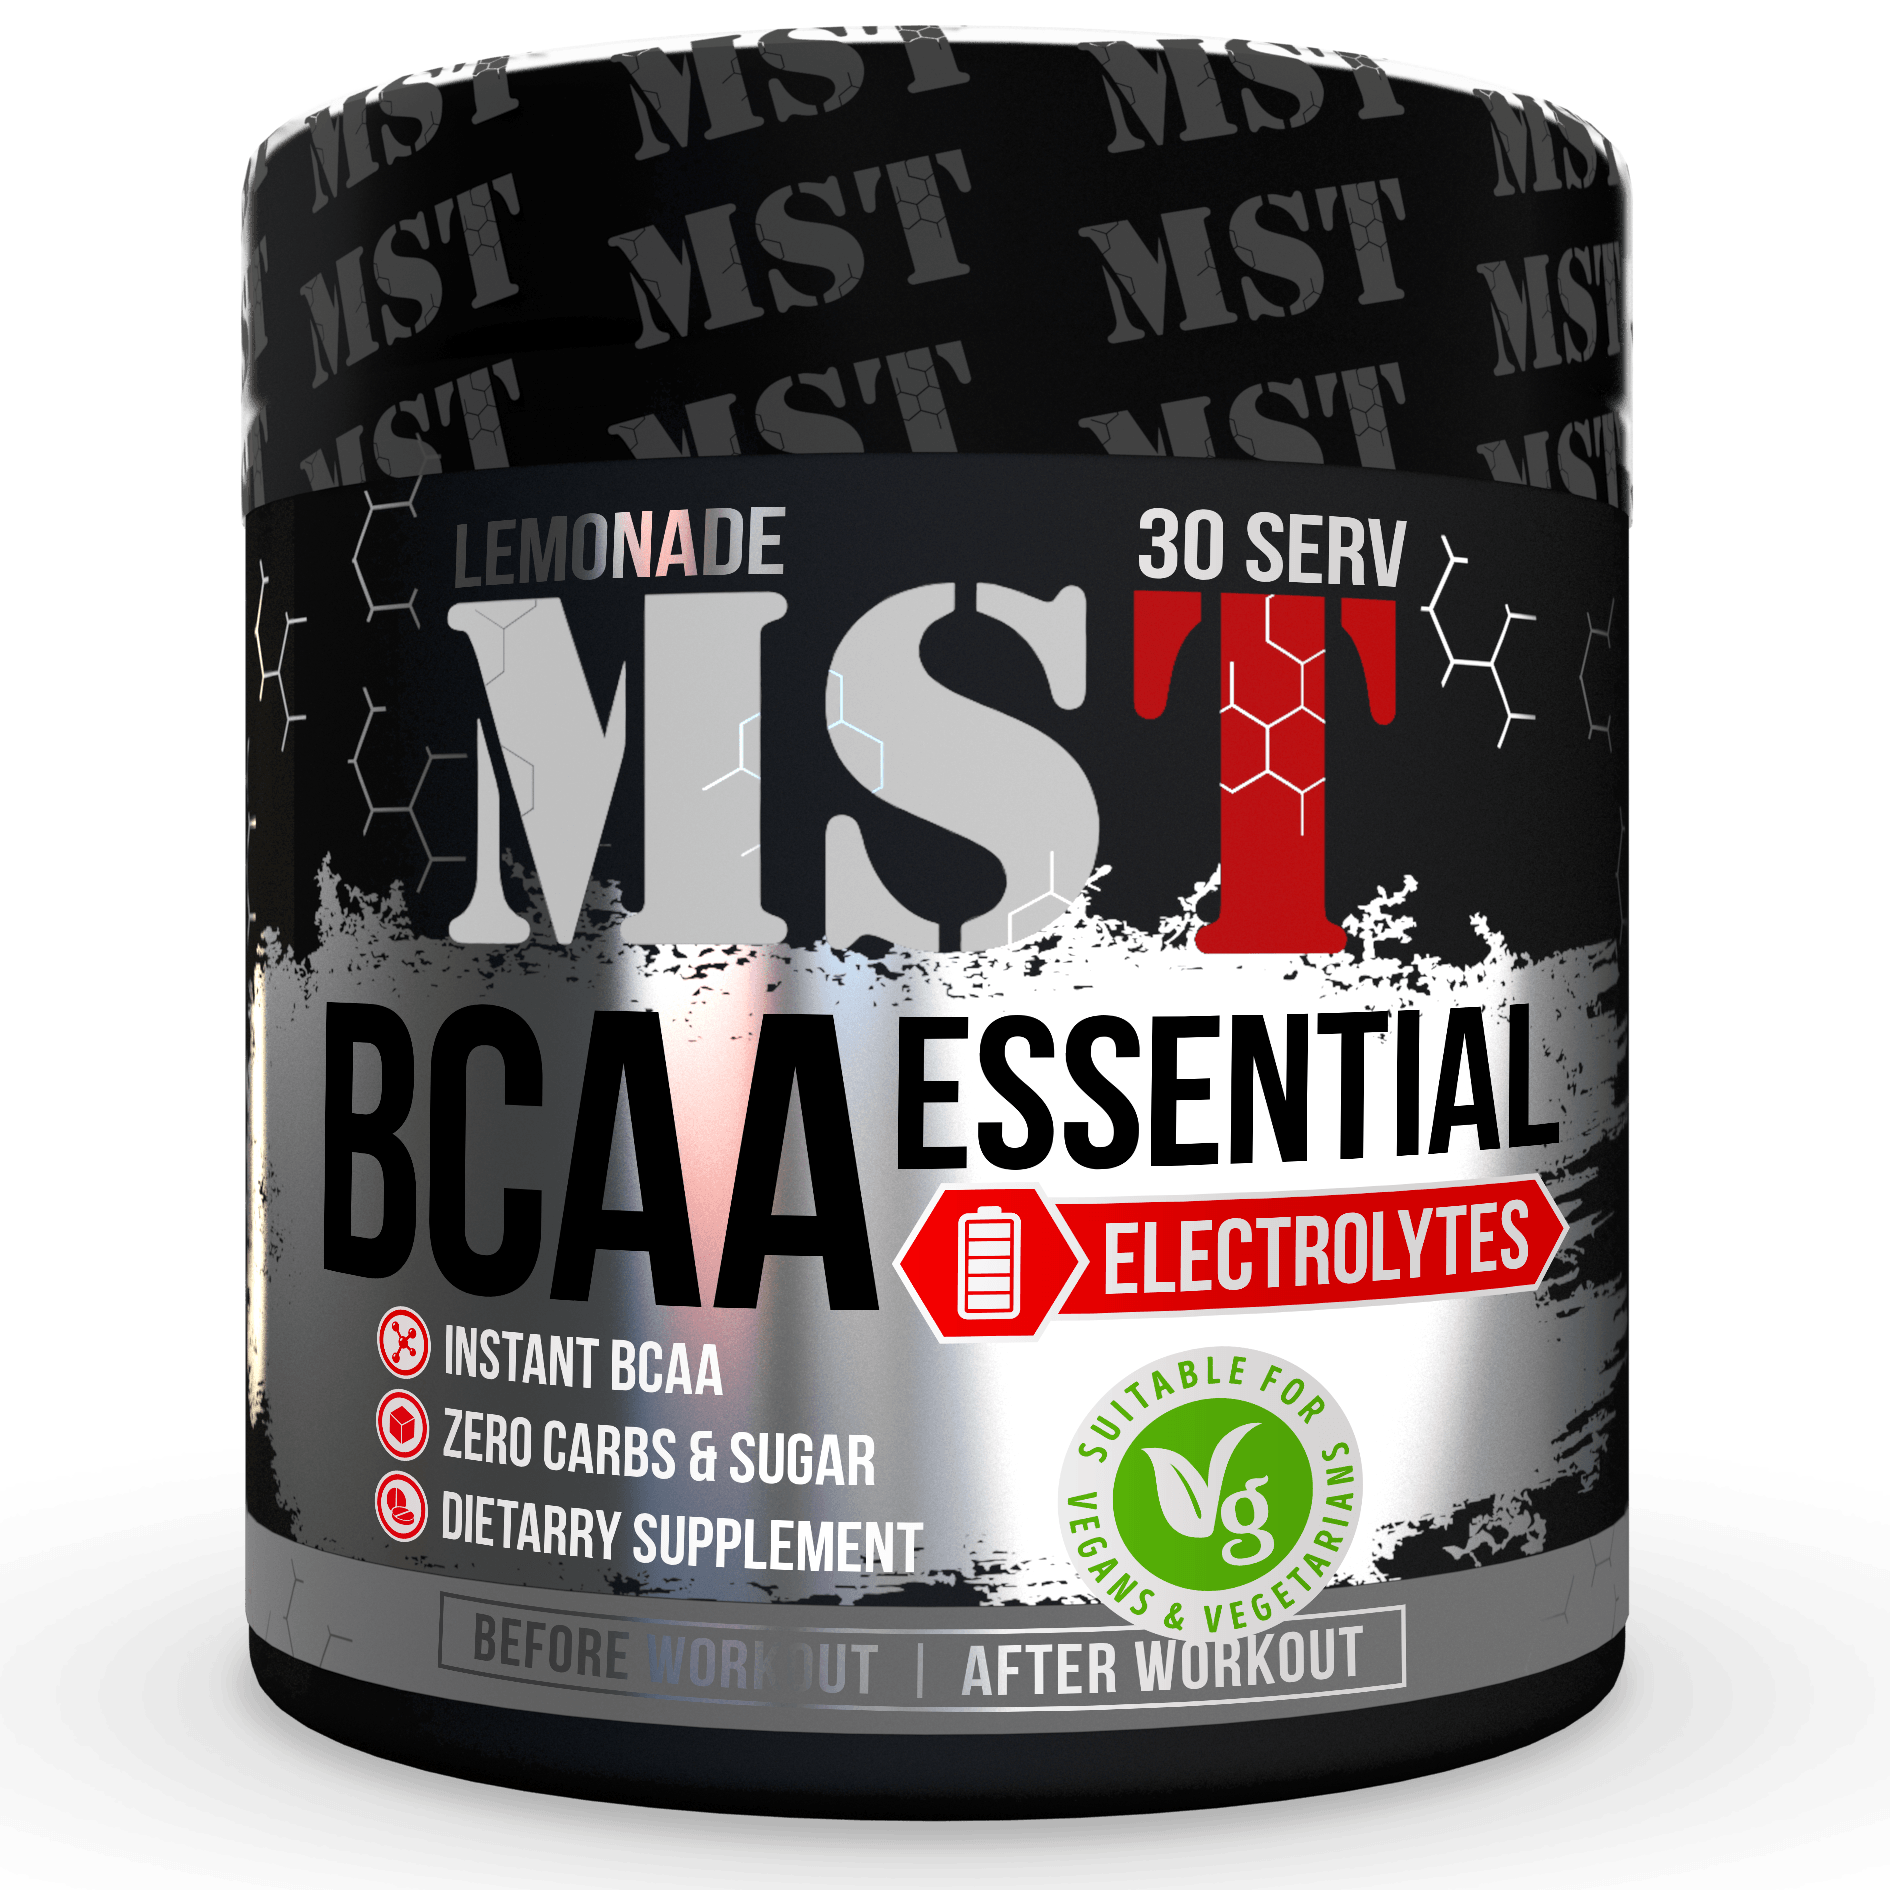 BCAA Essential Electrolytes, 240 g, MST Nutrition. BCAA. Weight Loss recuperación Anti-catabolic properties Lean muscle mass 